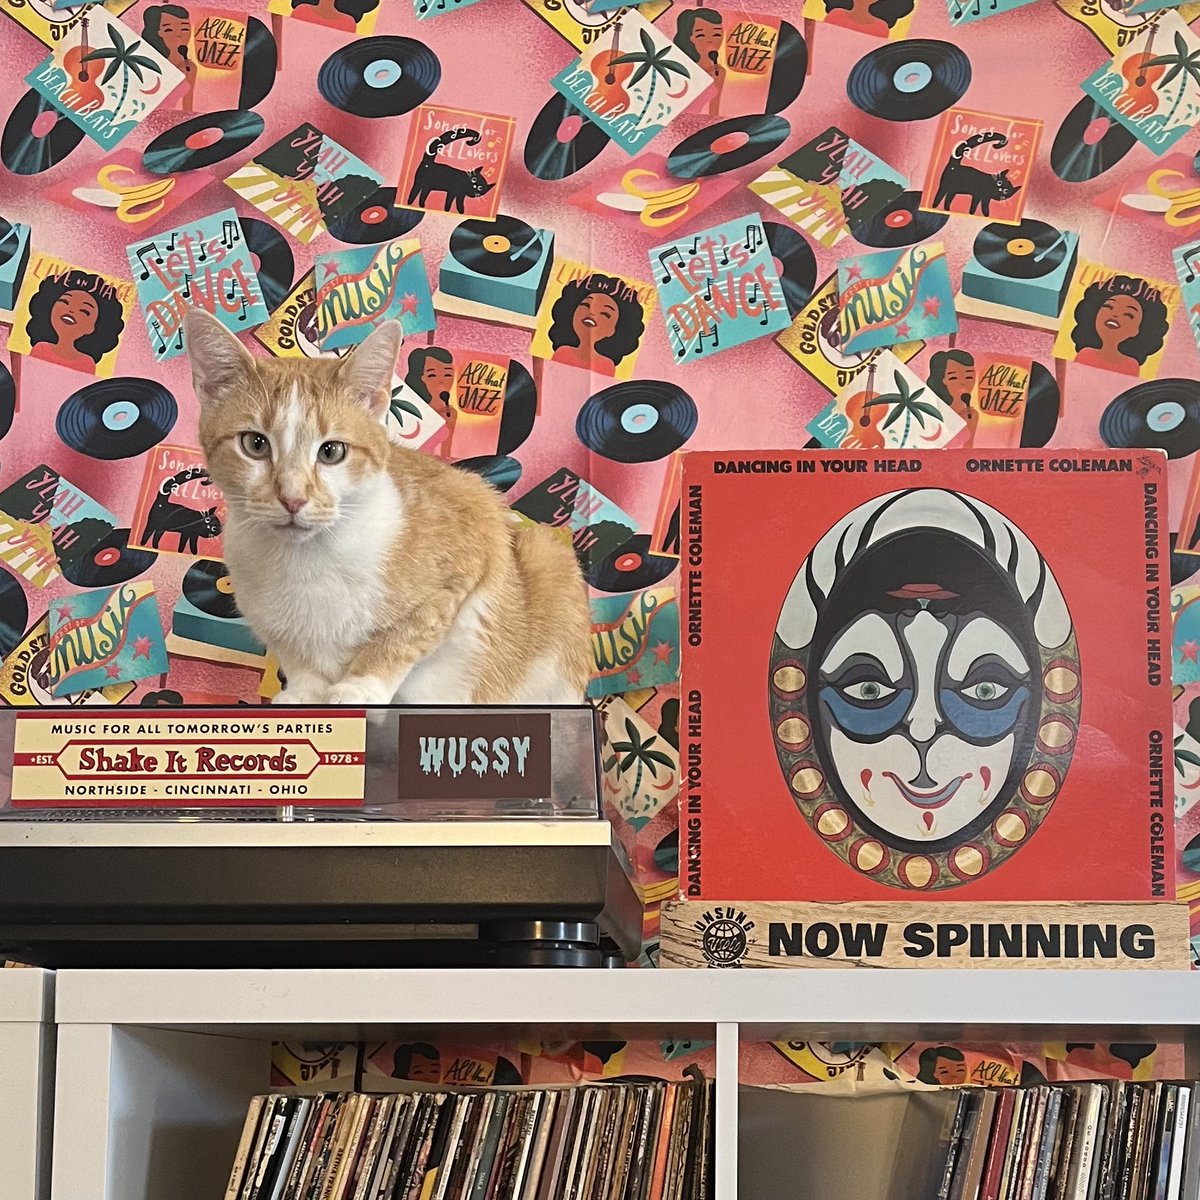 WEDNESDAY SPINS DANCING IN YOUR HEAD (1977) Here is Ronnie with one of my favorite Ornette Coleman LP’s. “Theme from a Symphony' was the first recording to feature Coleman's electric band, which later became known as Prime Time.